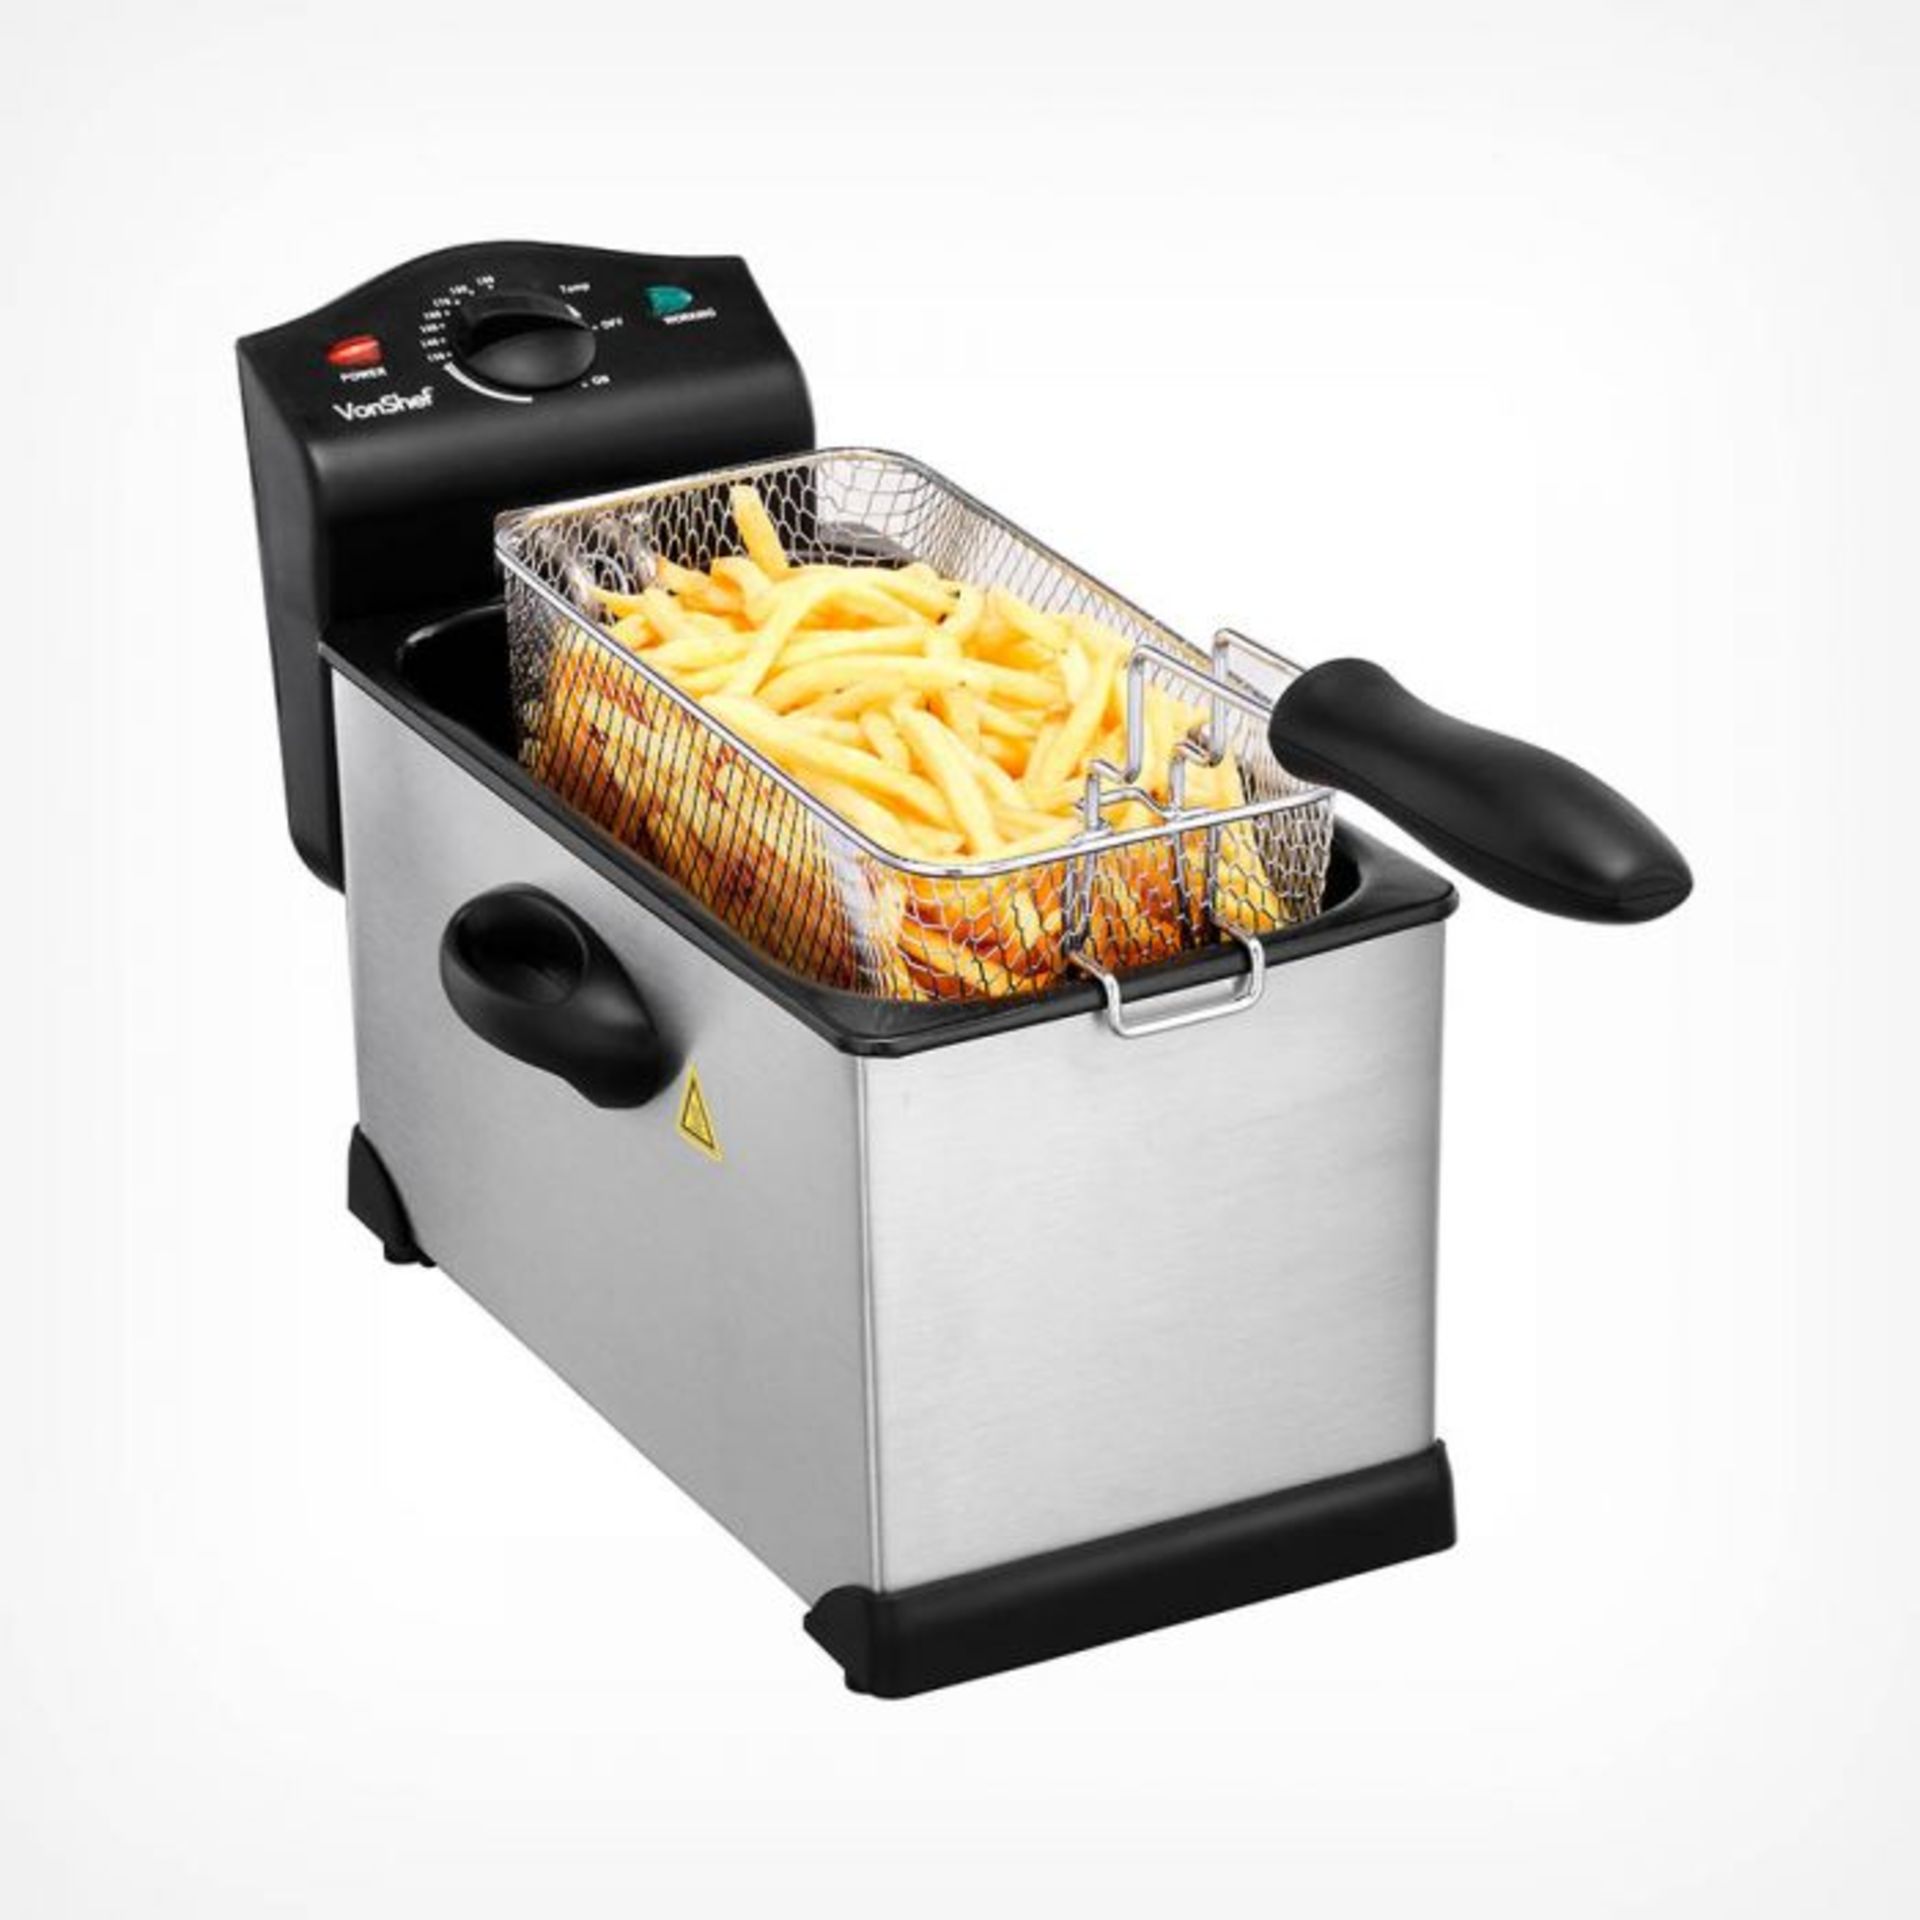 (NN97) 3L Deep Fat Fryer Large 3L capacity Deep Fat Fryer – perfect for frying sweet and sa... - Image 2 of 5